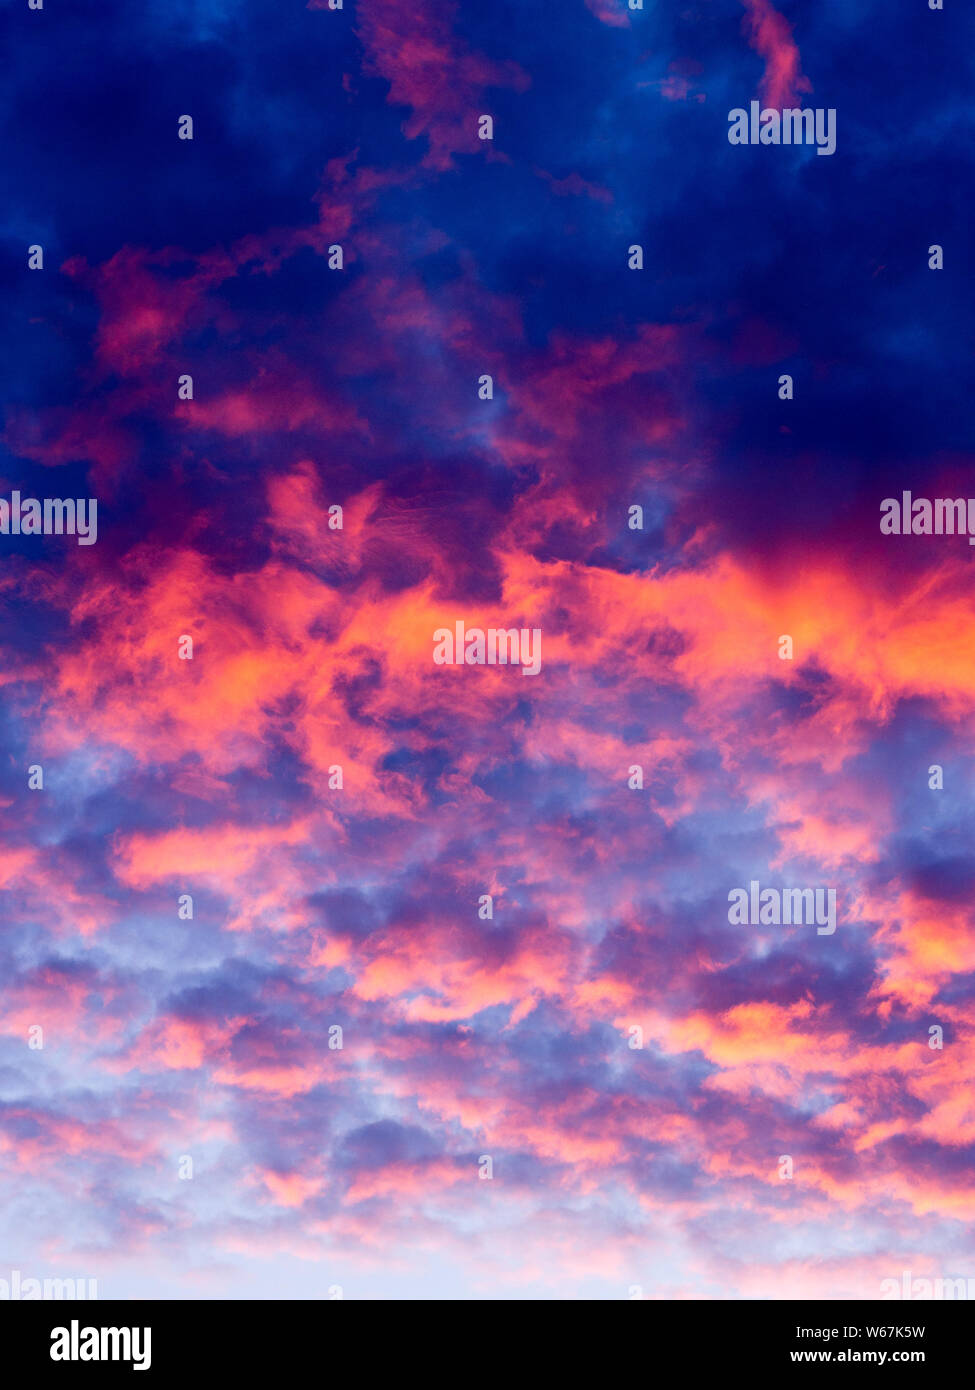 Sky at sunset with pink/orange clouds Stock Photo